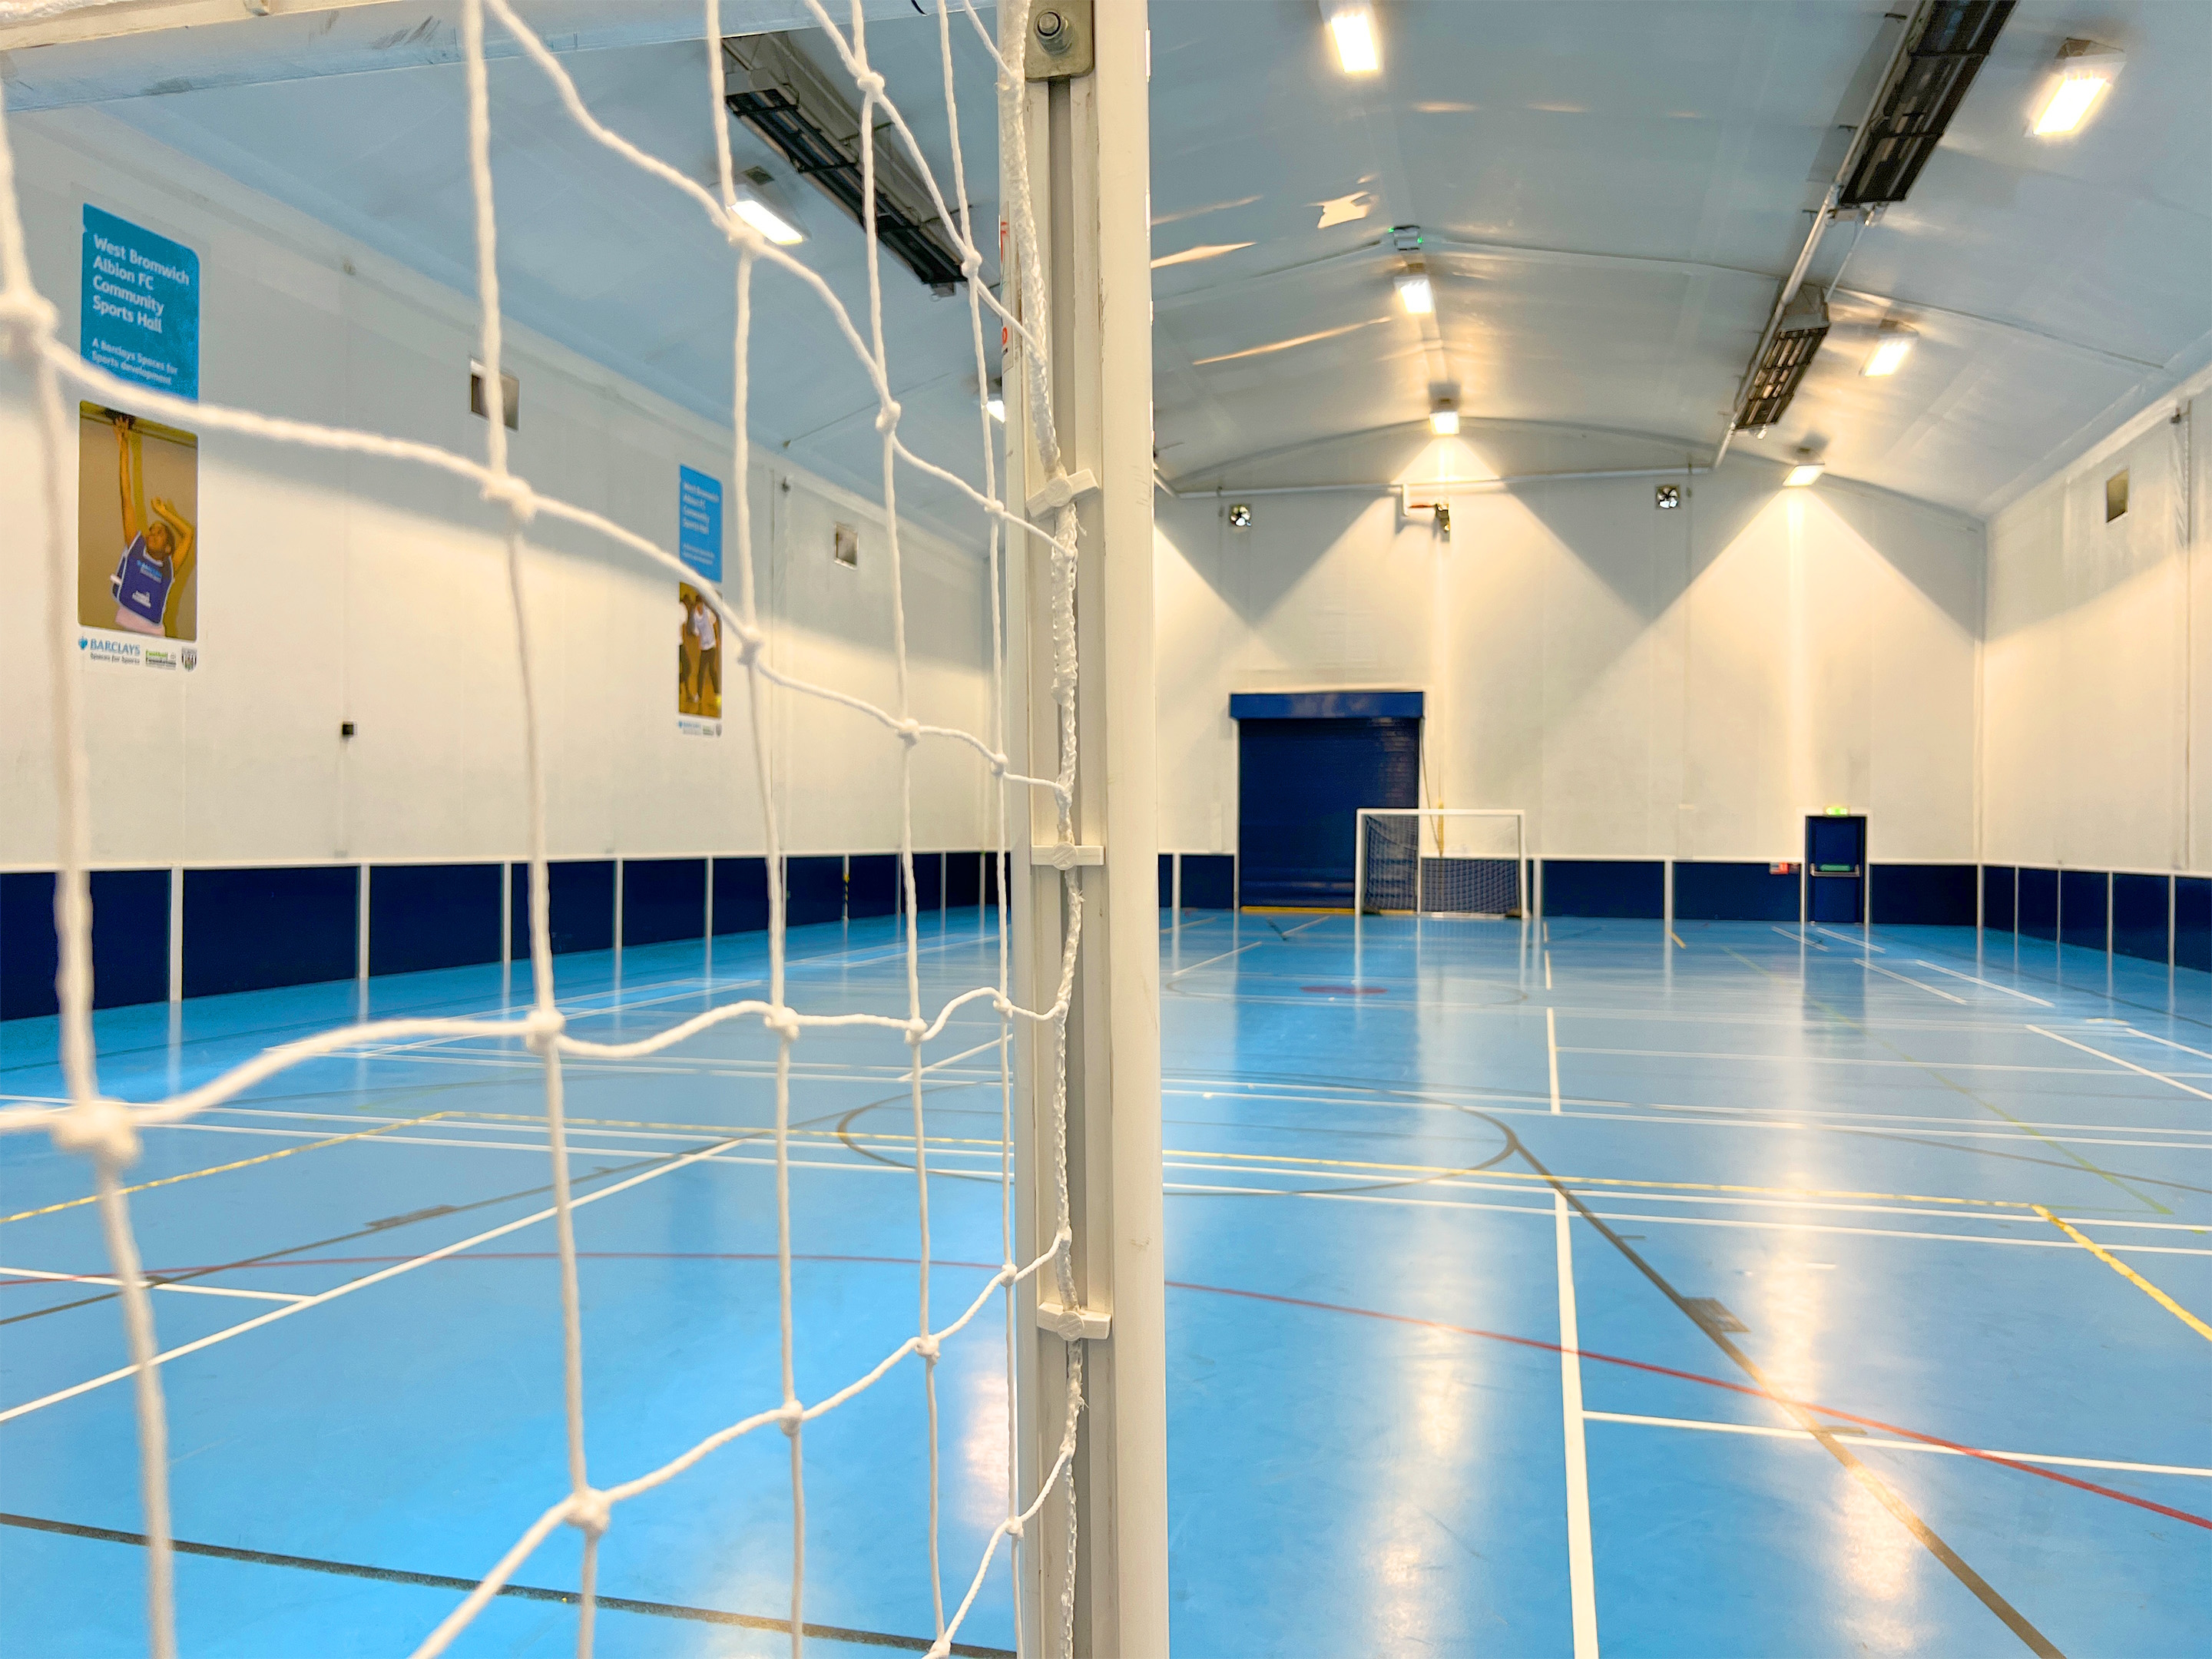 The Albion Foundation Community Sports Hall